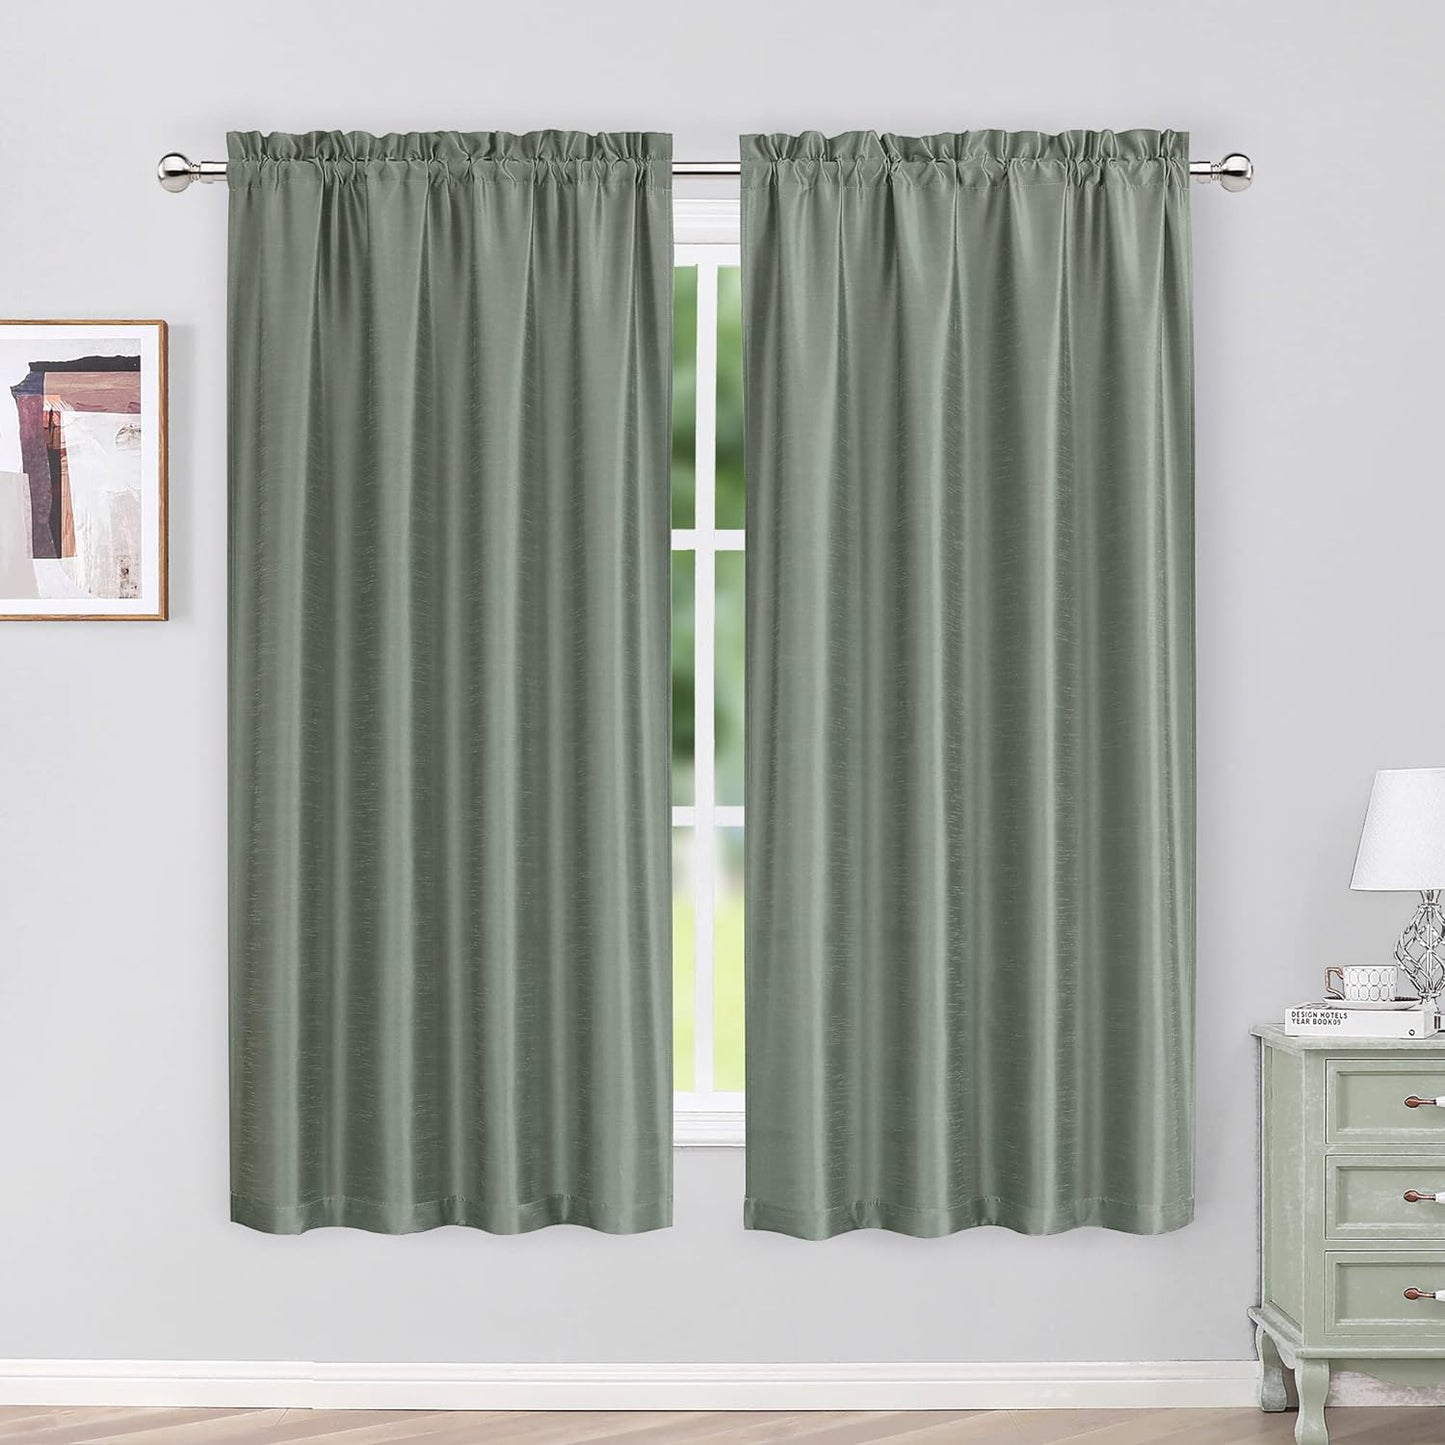 Chyhomenyc Uptown Sage Green Kitchen Curtains 45 Inch Length 2 Panels, Room Darkening Faux Silk Chic Fabric Short Window Curtains for Bedroom Living Room, Each 30Wx45L  Chyhomenyc Sage Green 2X40"Wx63"L 